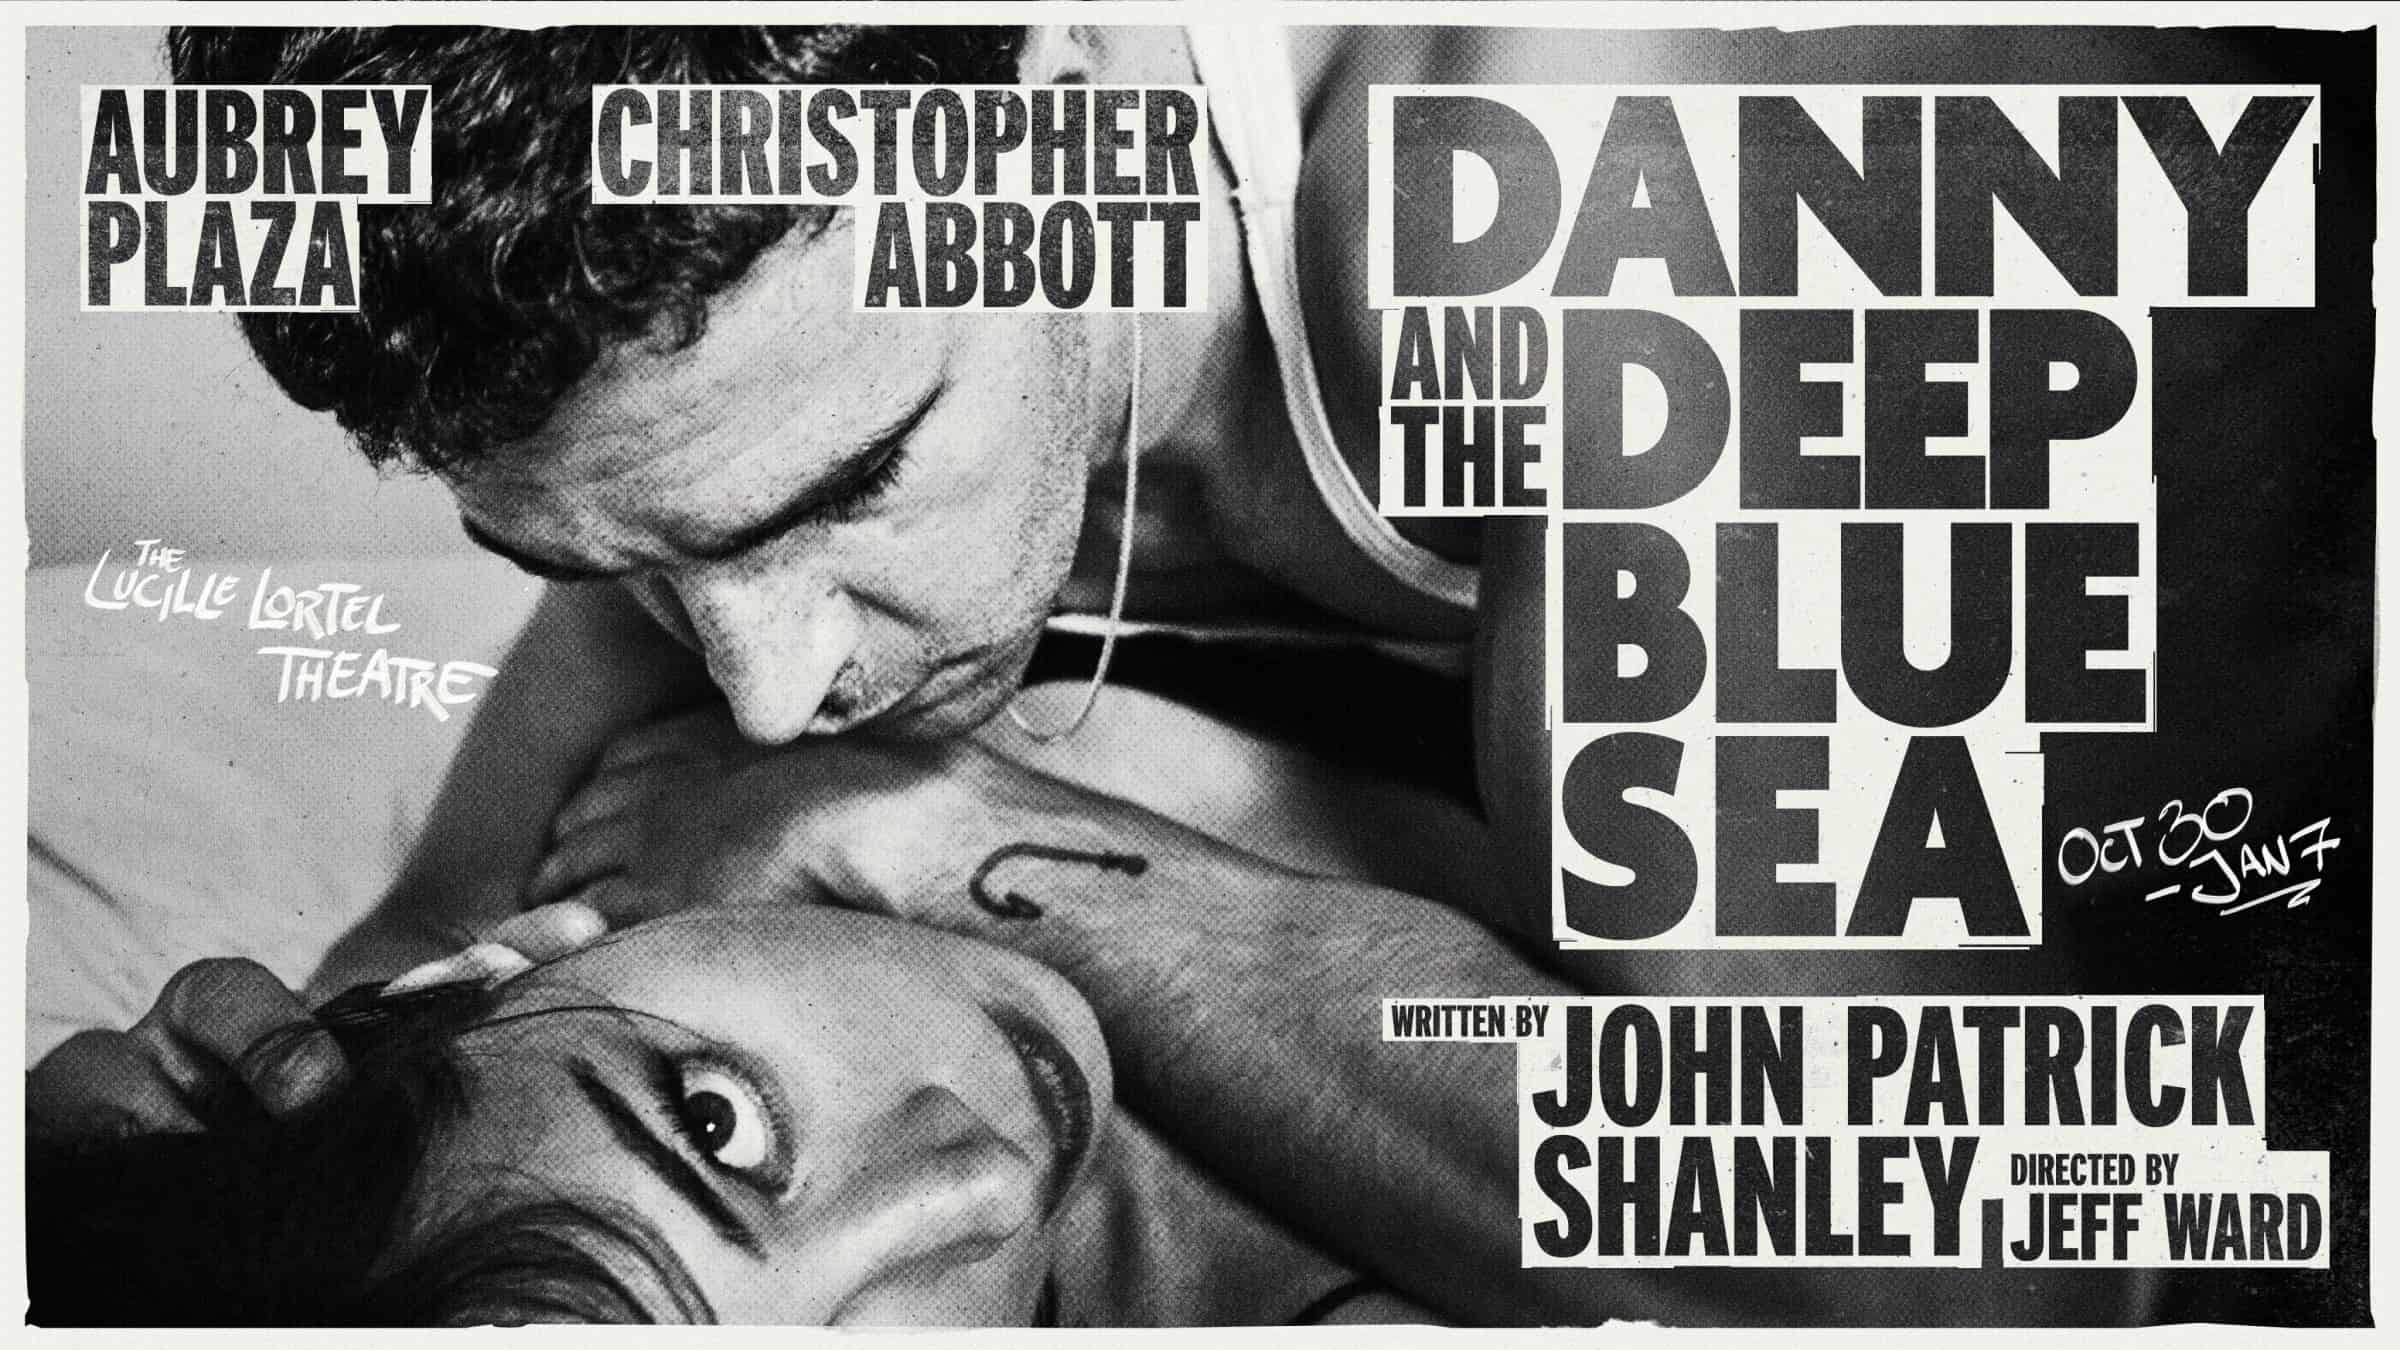 Danny And the Deep Blue Sea Starring Aubrey Plaza and Christopher Abbott